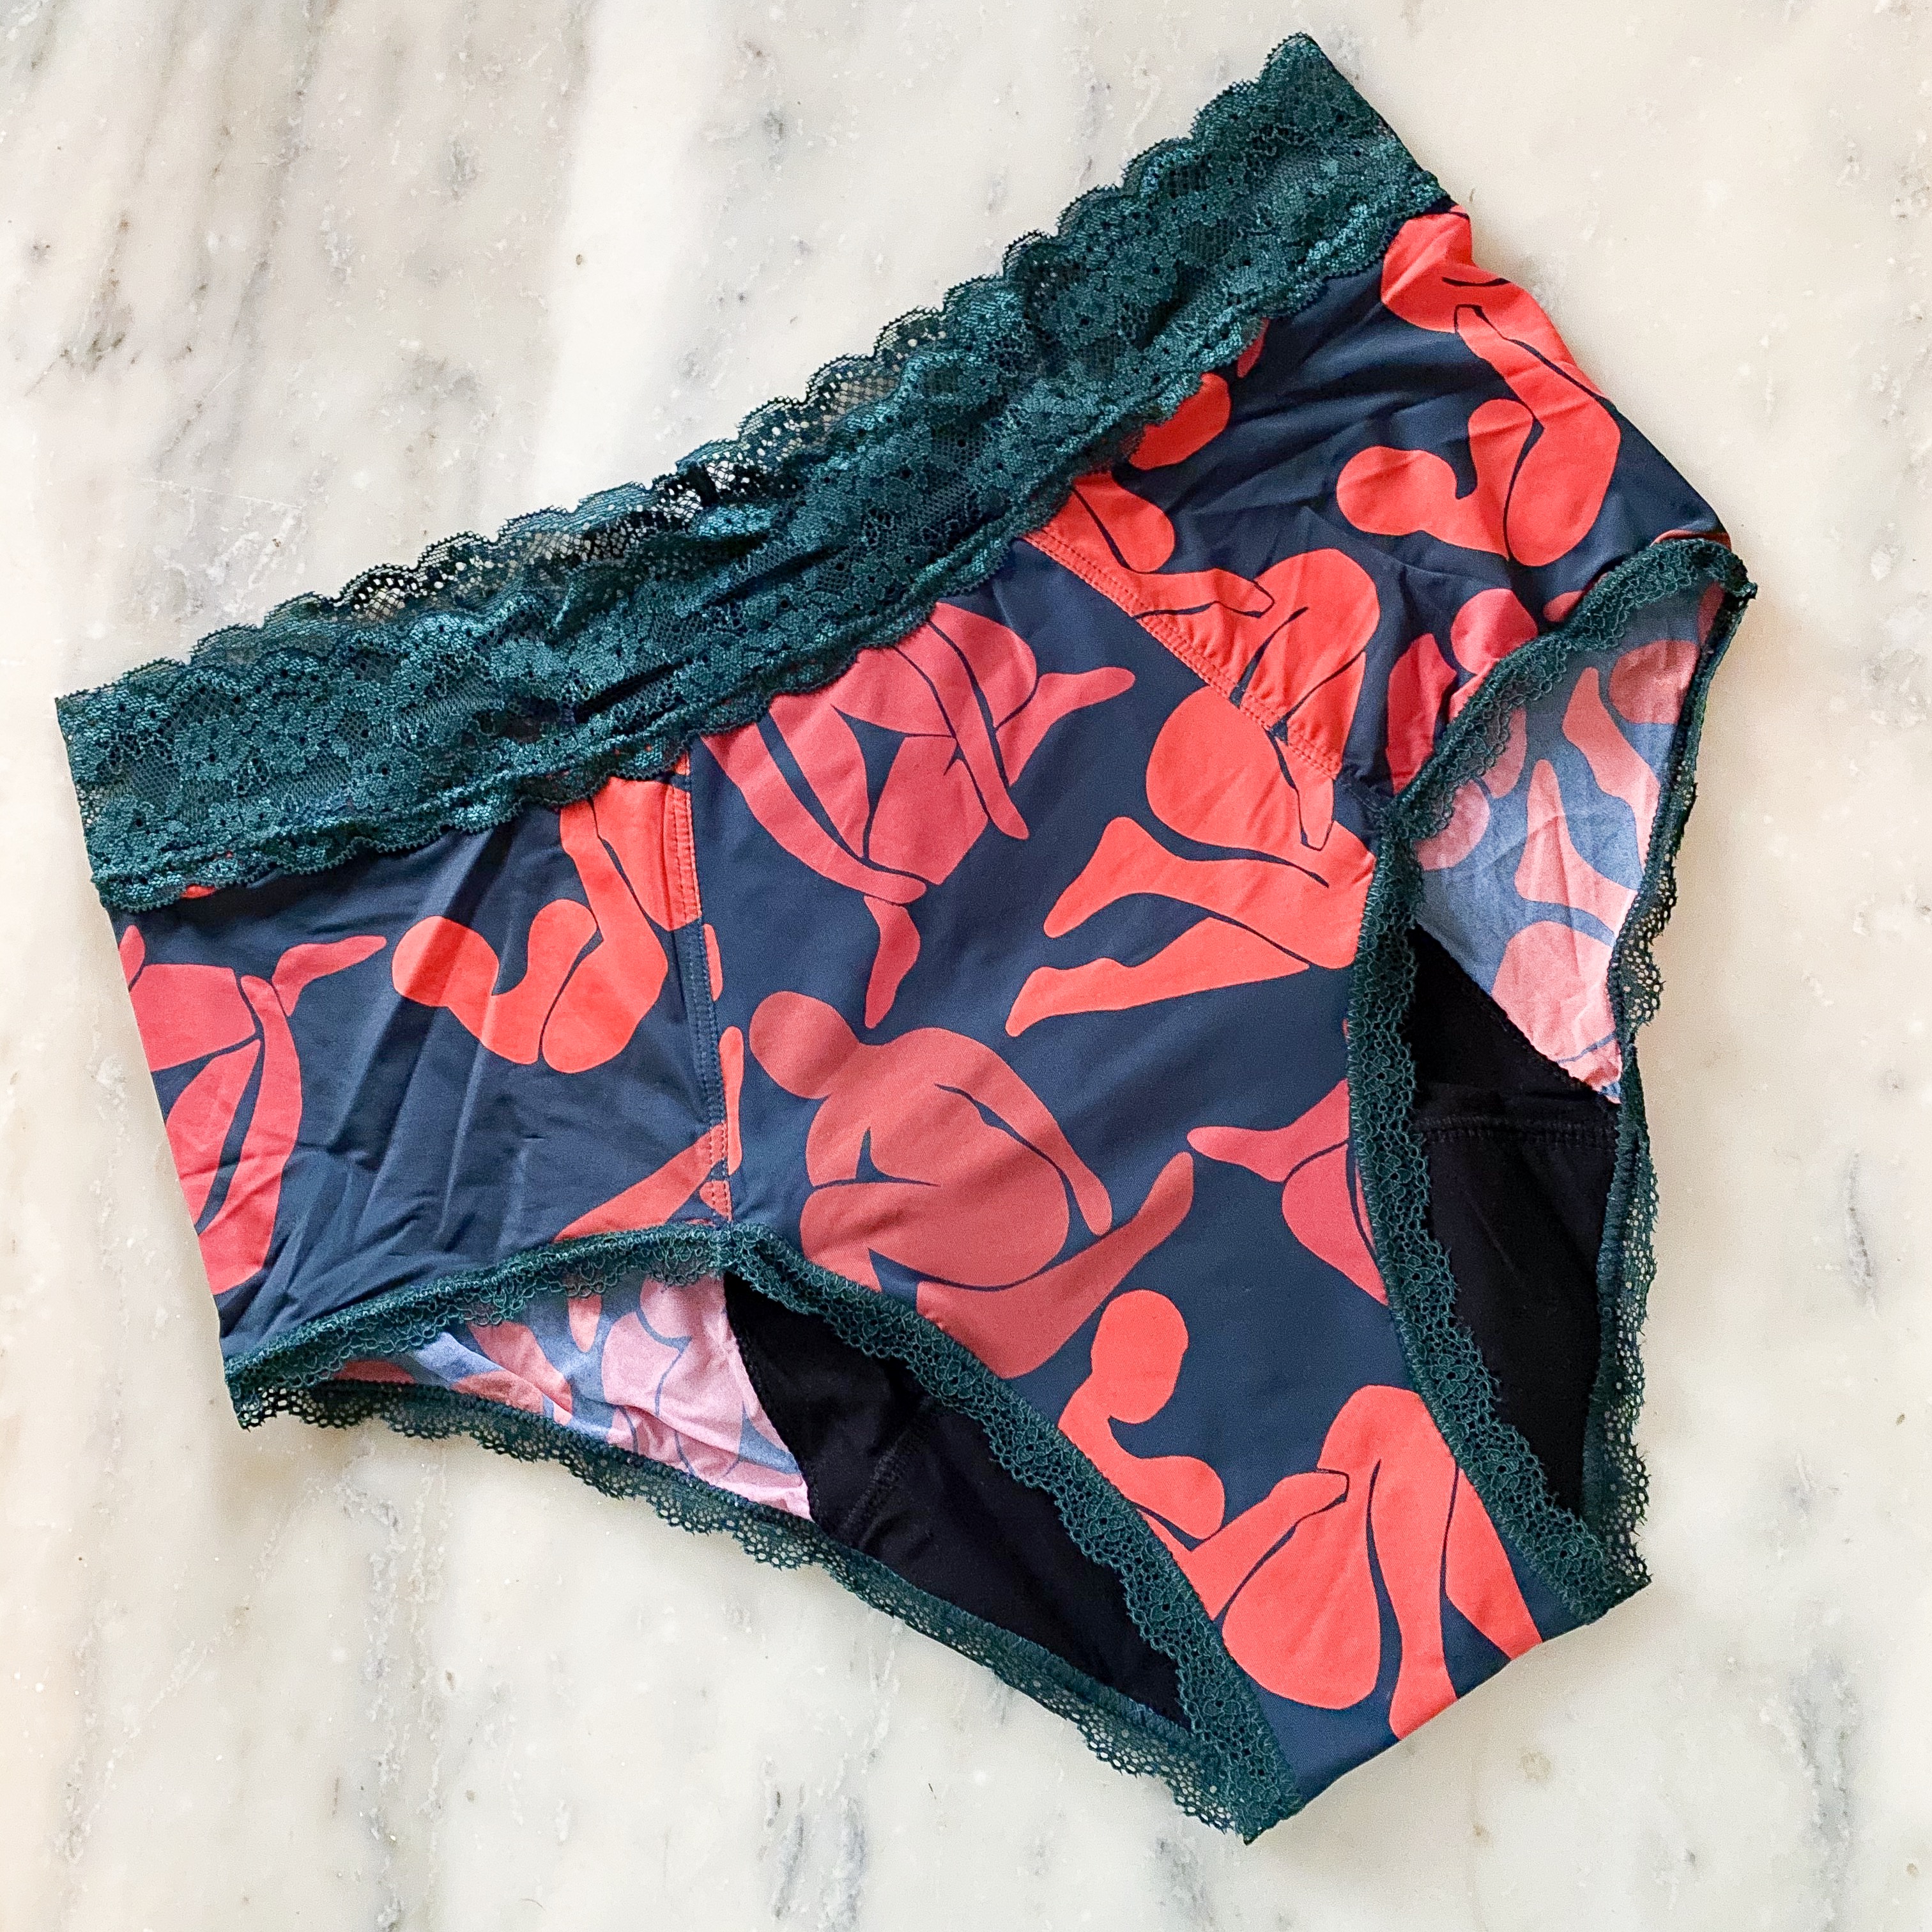 I Tried Period Panties: Evereve Period Panties Review - Color Me Mad